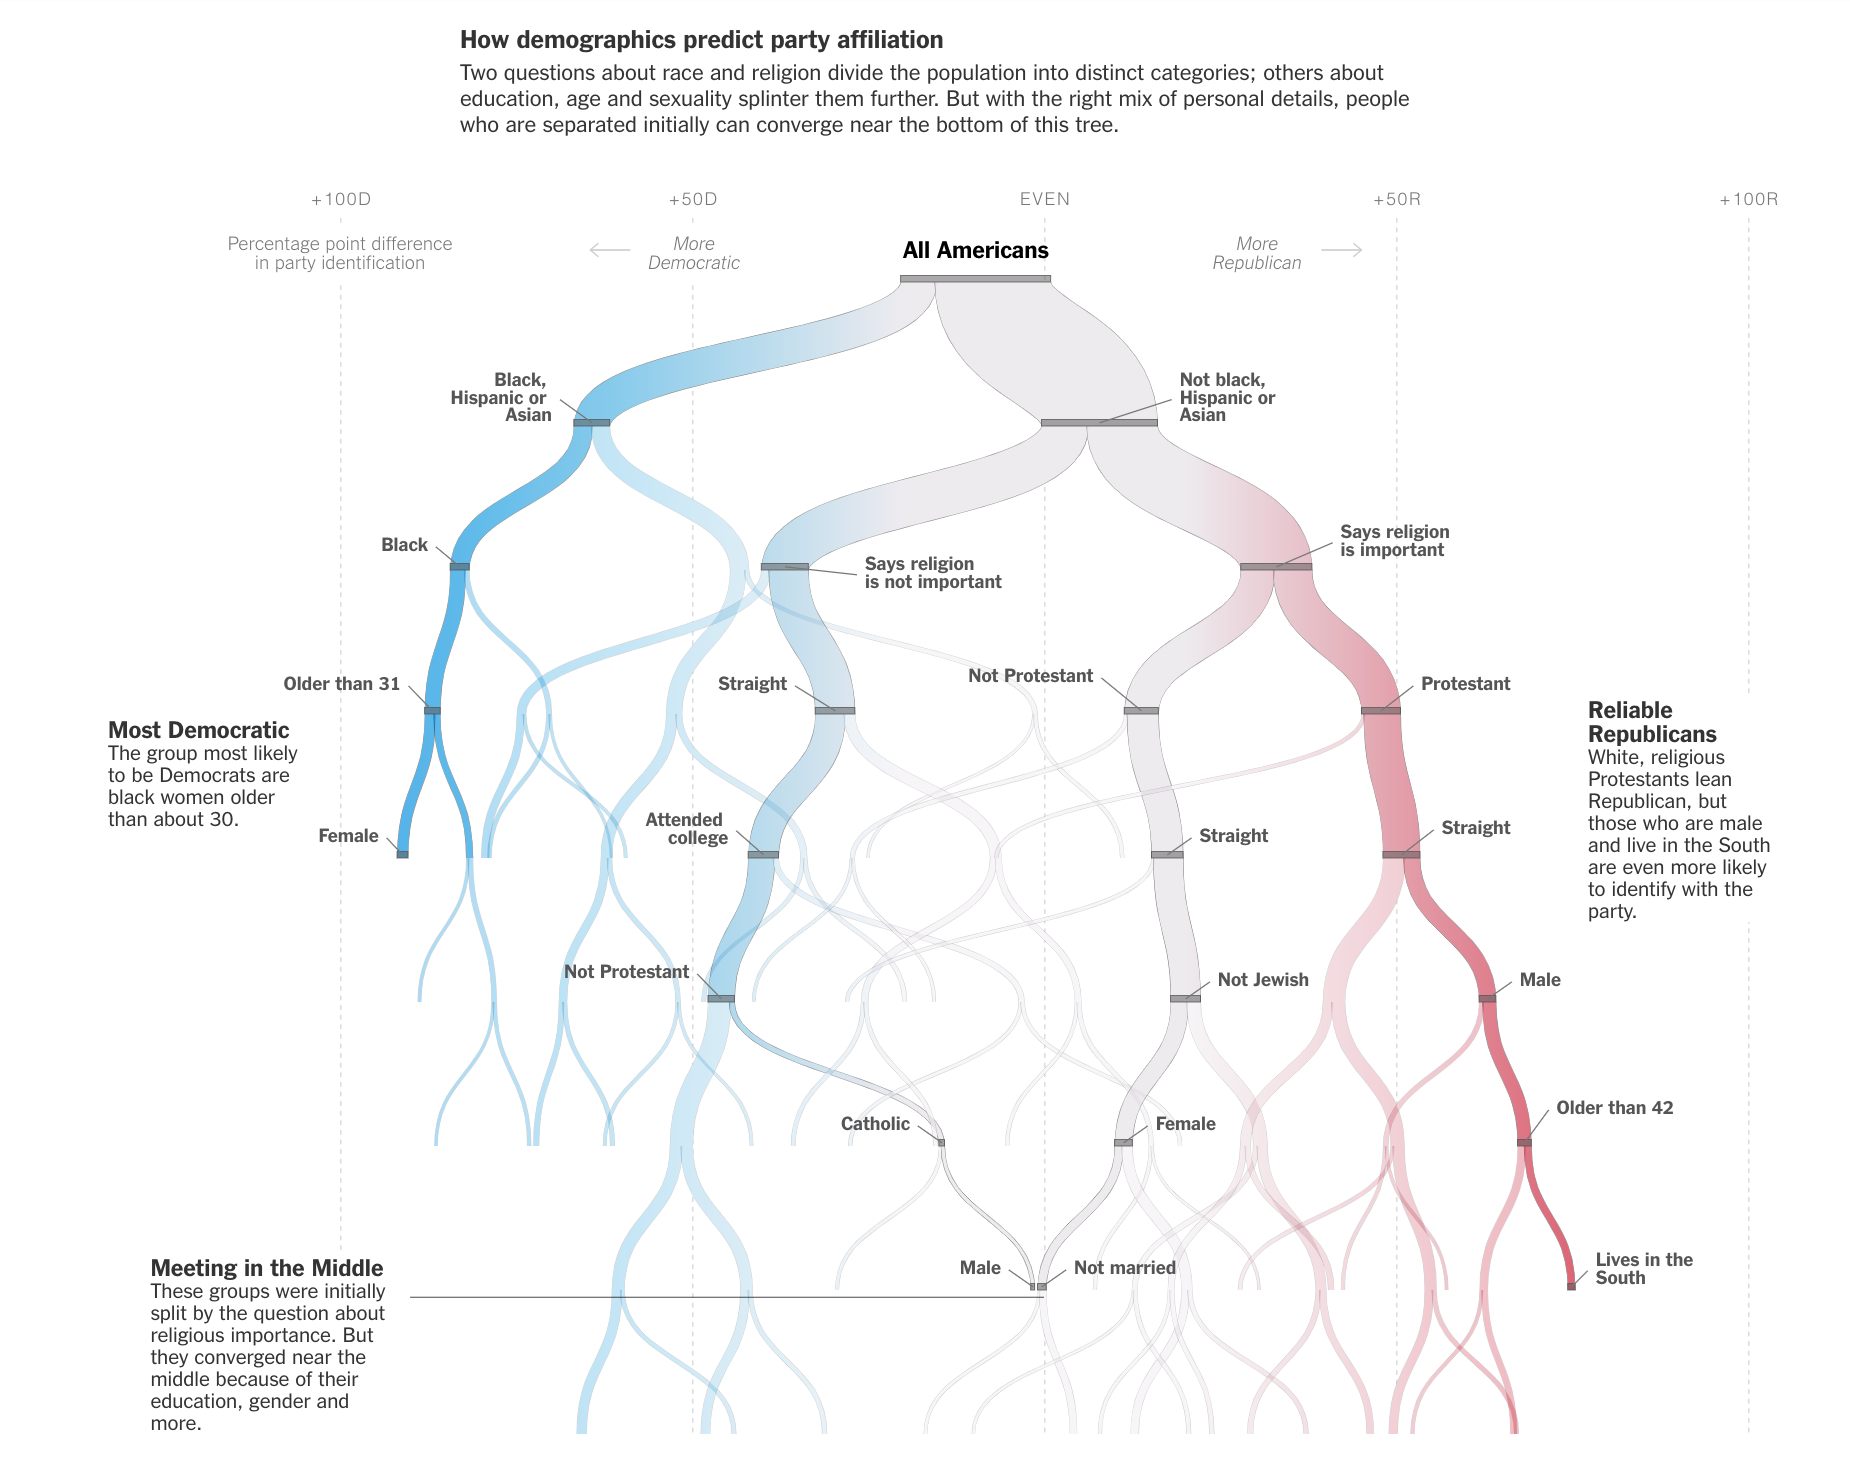 https://www.nytimes.com/interactive/2019/08/08/opinion/sunday/party-polarization-quiz.html Quiz: Let Us Predict Whether You're a Democrat or a Republican NYT, Aug 8, 2019.  Note that race is the first and dominant node, followed by religion.